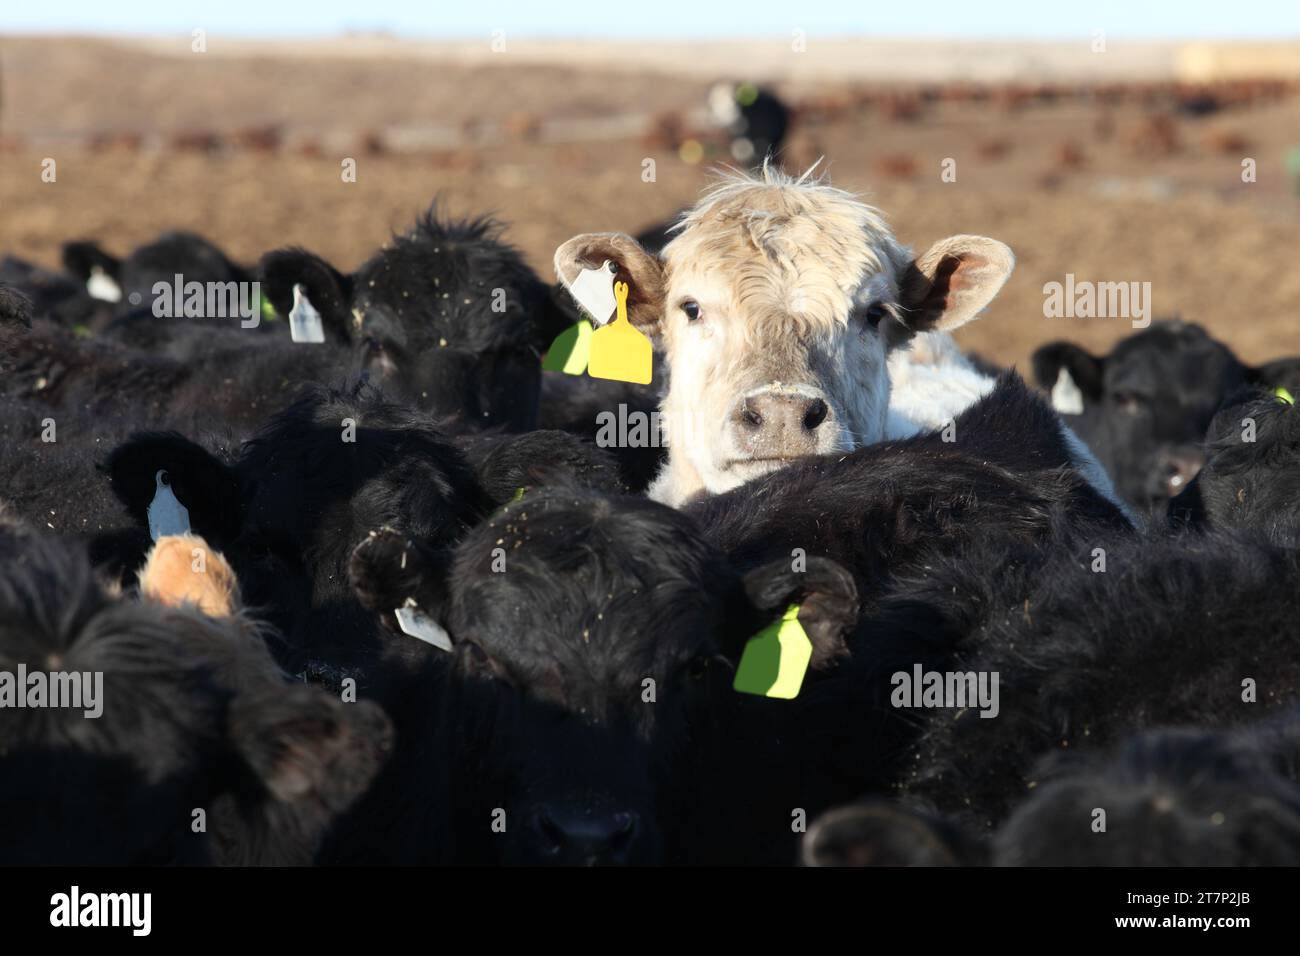 A white cow head in a group of Black Angus cattle in a feedlot. Stock Photo